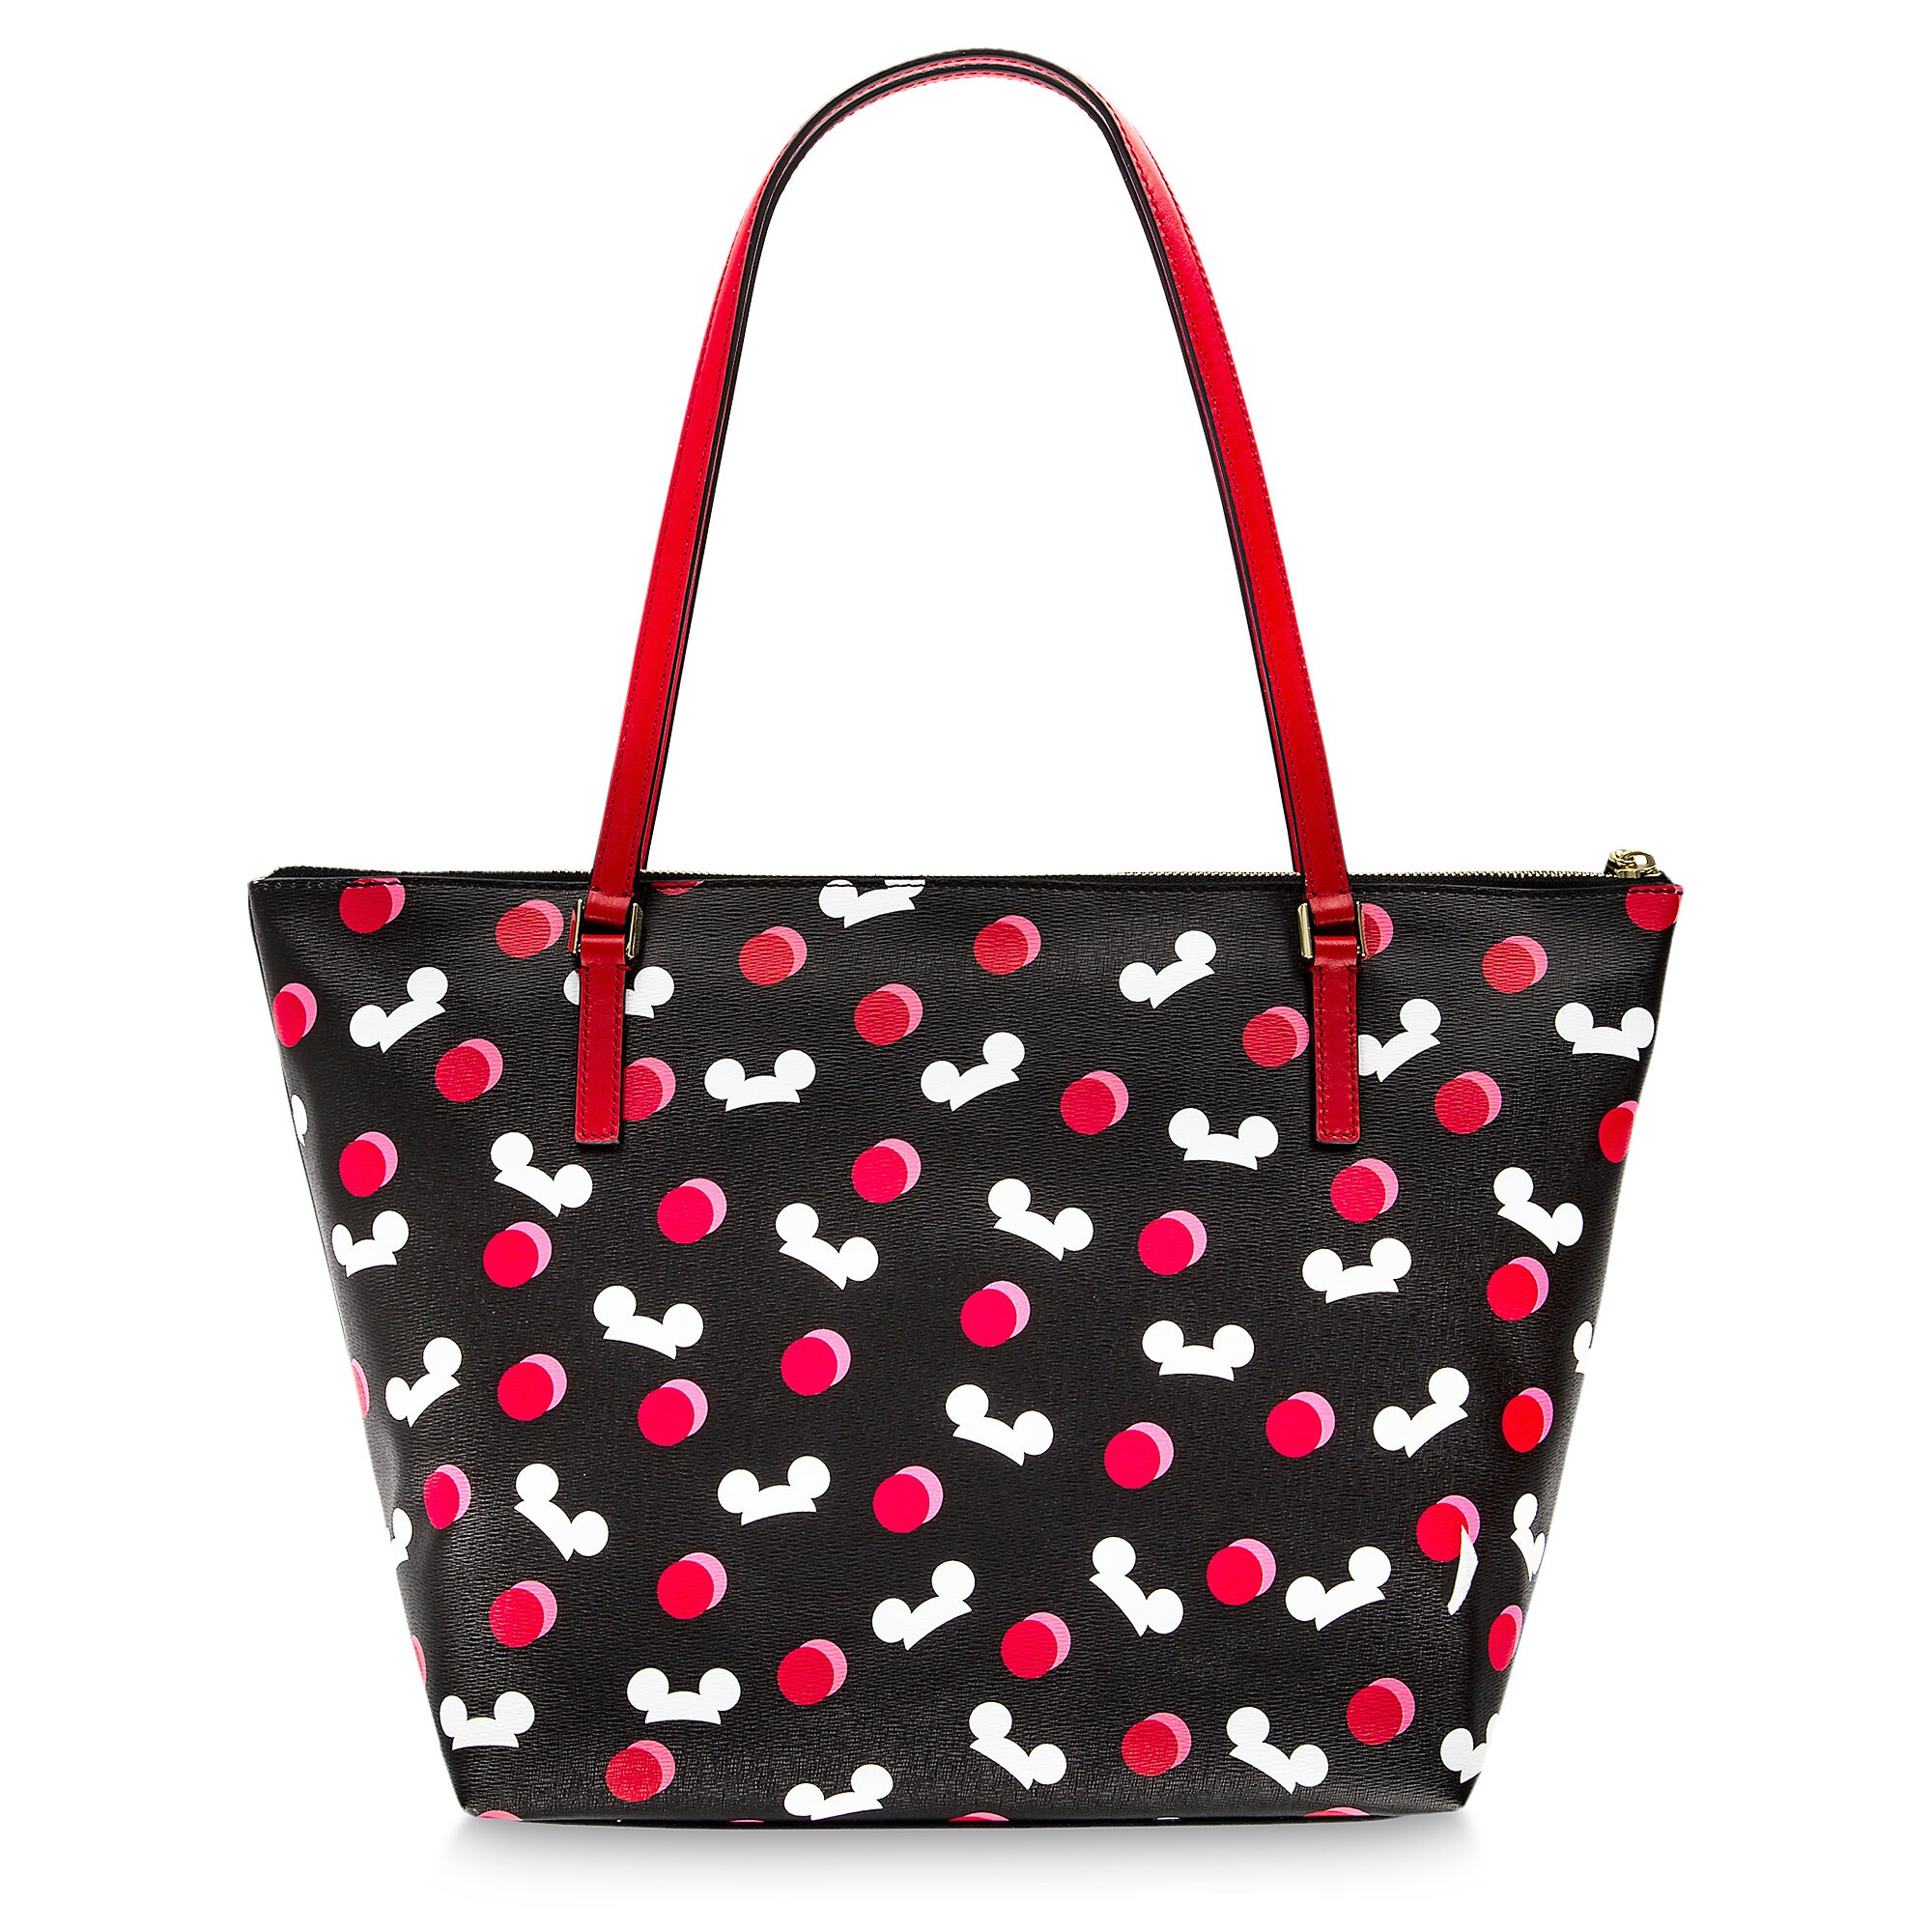 Mickey Mouse Ear Hat Tote by kate spade new york - Black